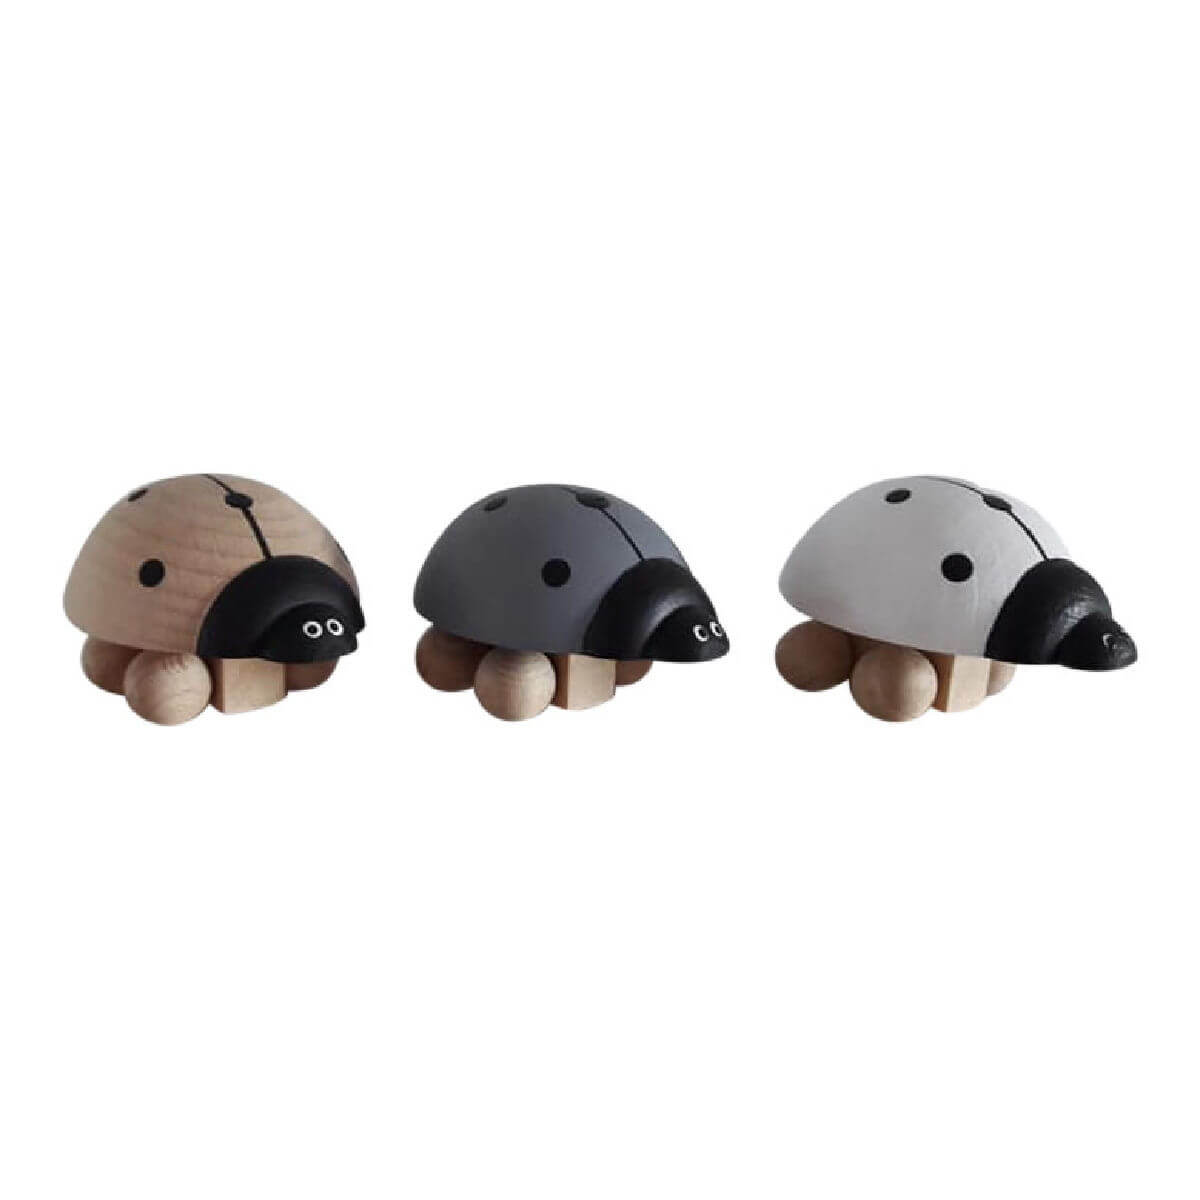 othat wooden push along toy ladybird in grey